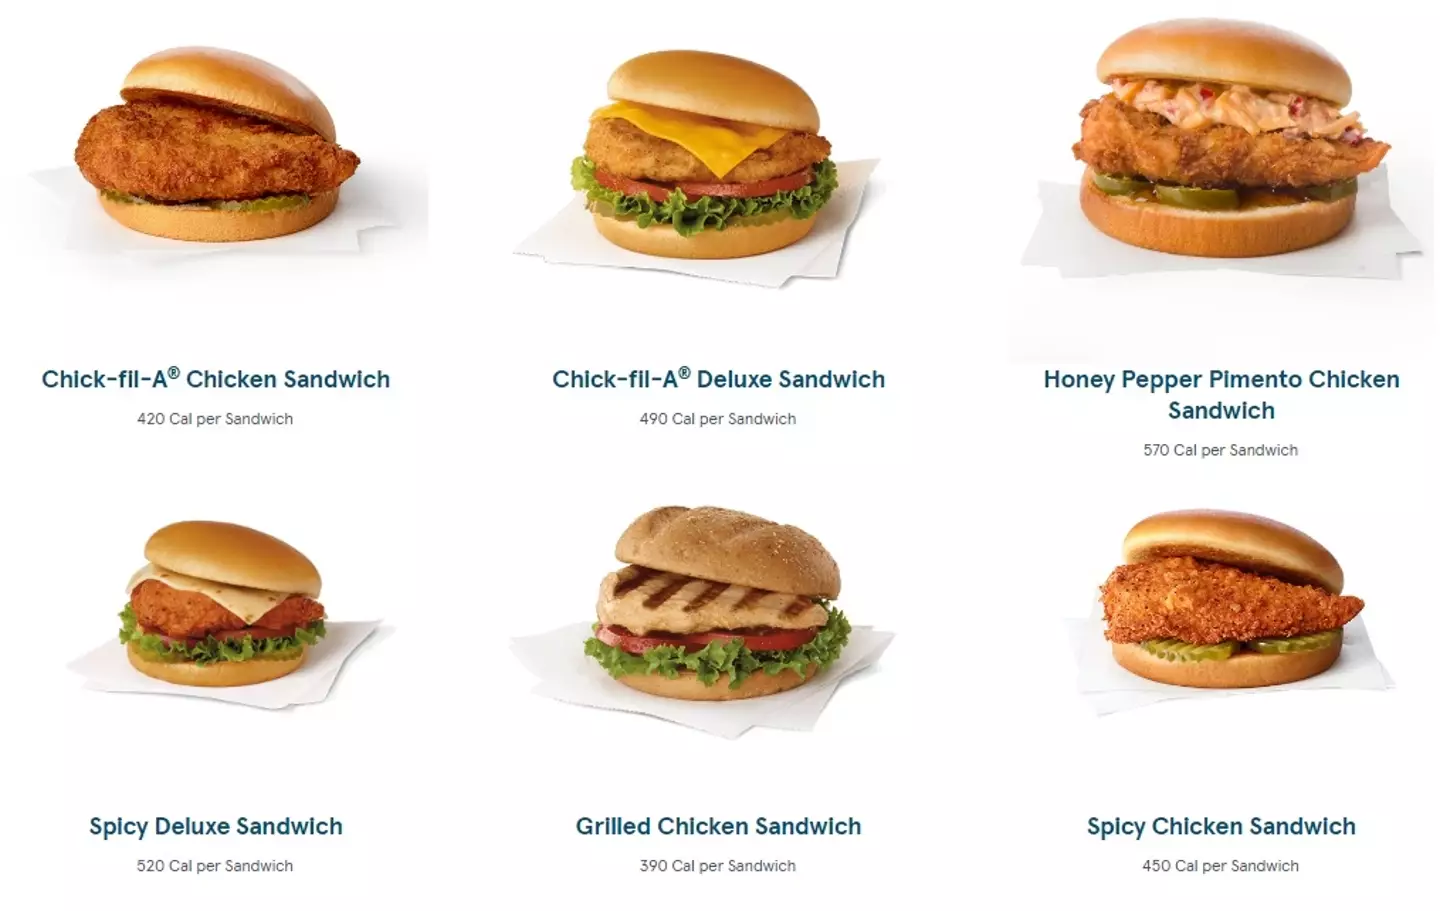 If you like chicken then Chick-fil-A is probably going to be right up your street.